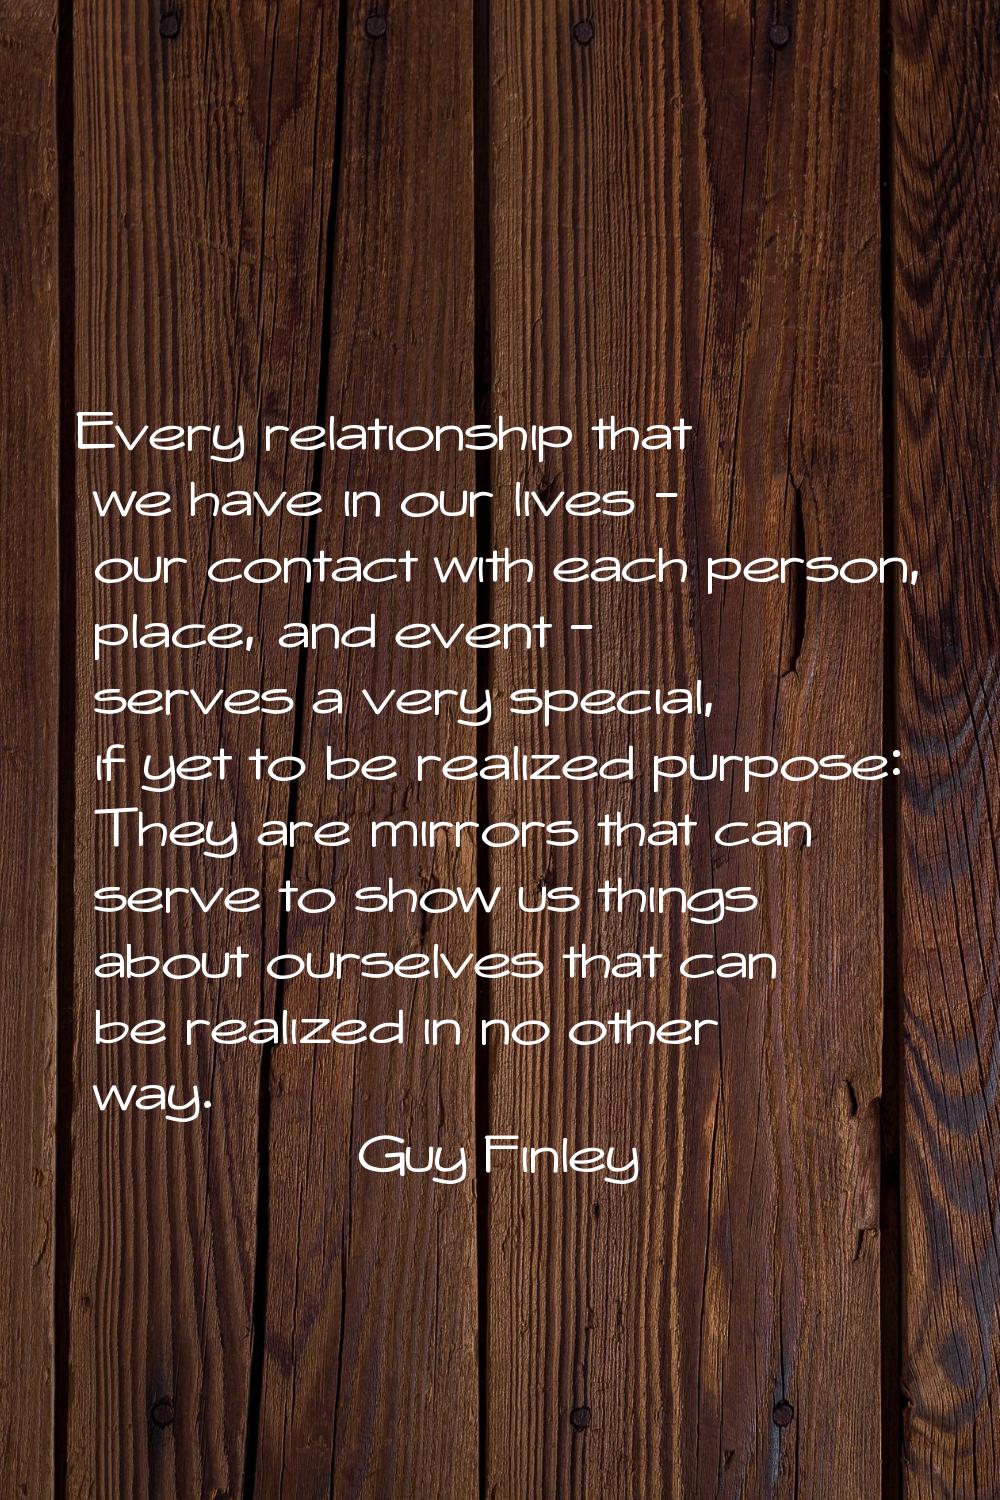 Every relationship that we have in our lives - our contact with each person, place, and event - ser